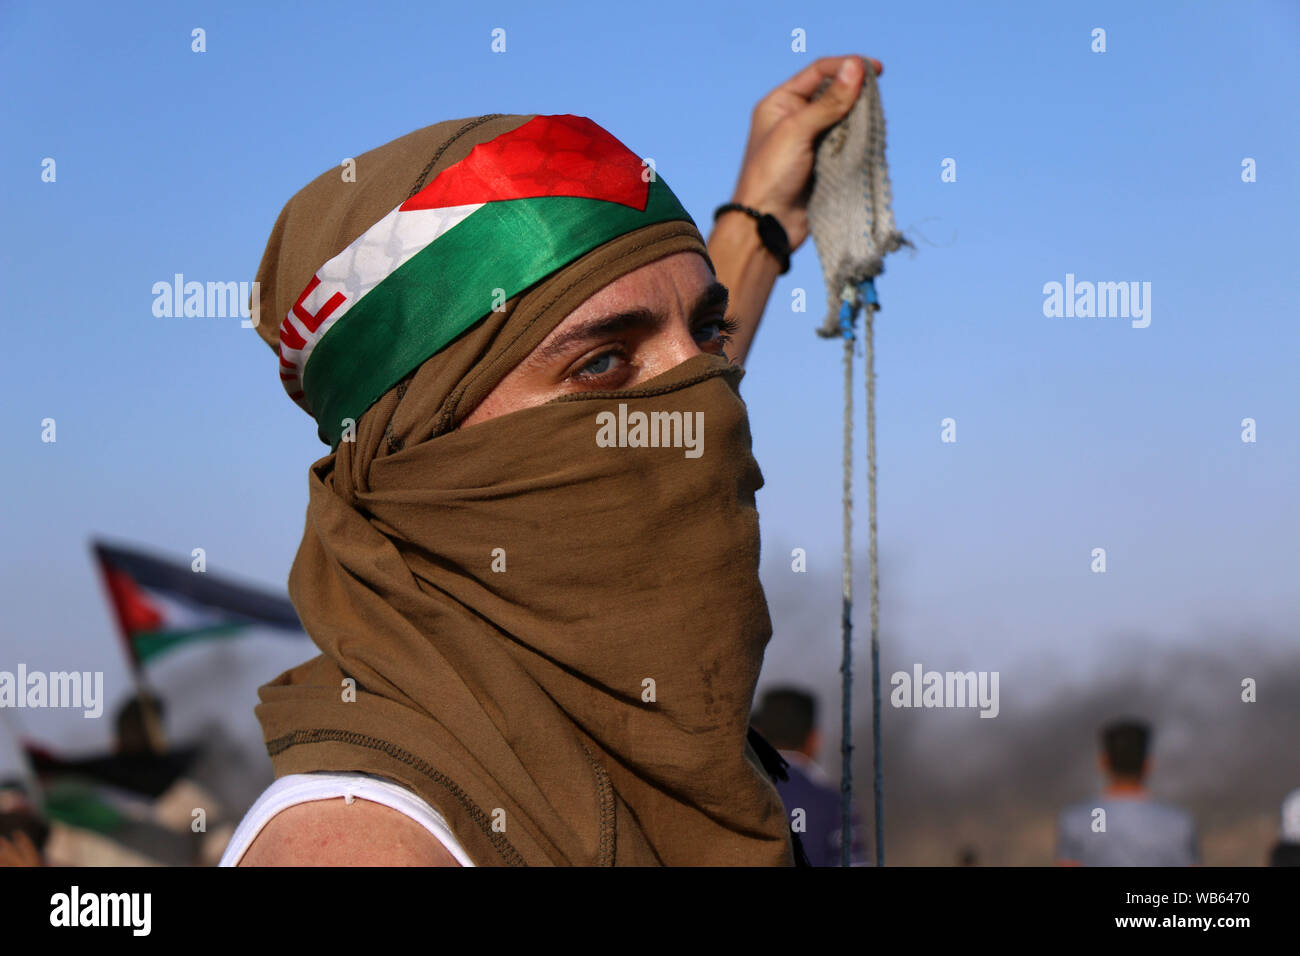 Khan Younis, Gaza Strip, Palestinian Territory. 23rd Aug, 2019. Palestinian protesters clash with Israeli troops following the tents protest where Palestinians demand the right to return to their homeland at the Israel-Gaza border. Credit: Mariam Dagga/APA Images/ZUMA Wire/Alamy Live News Stock Photo